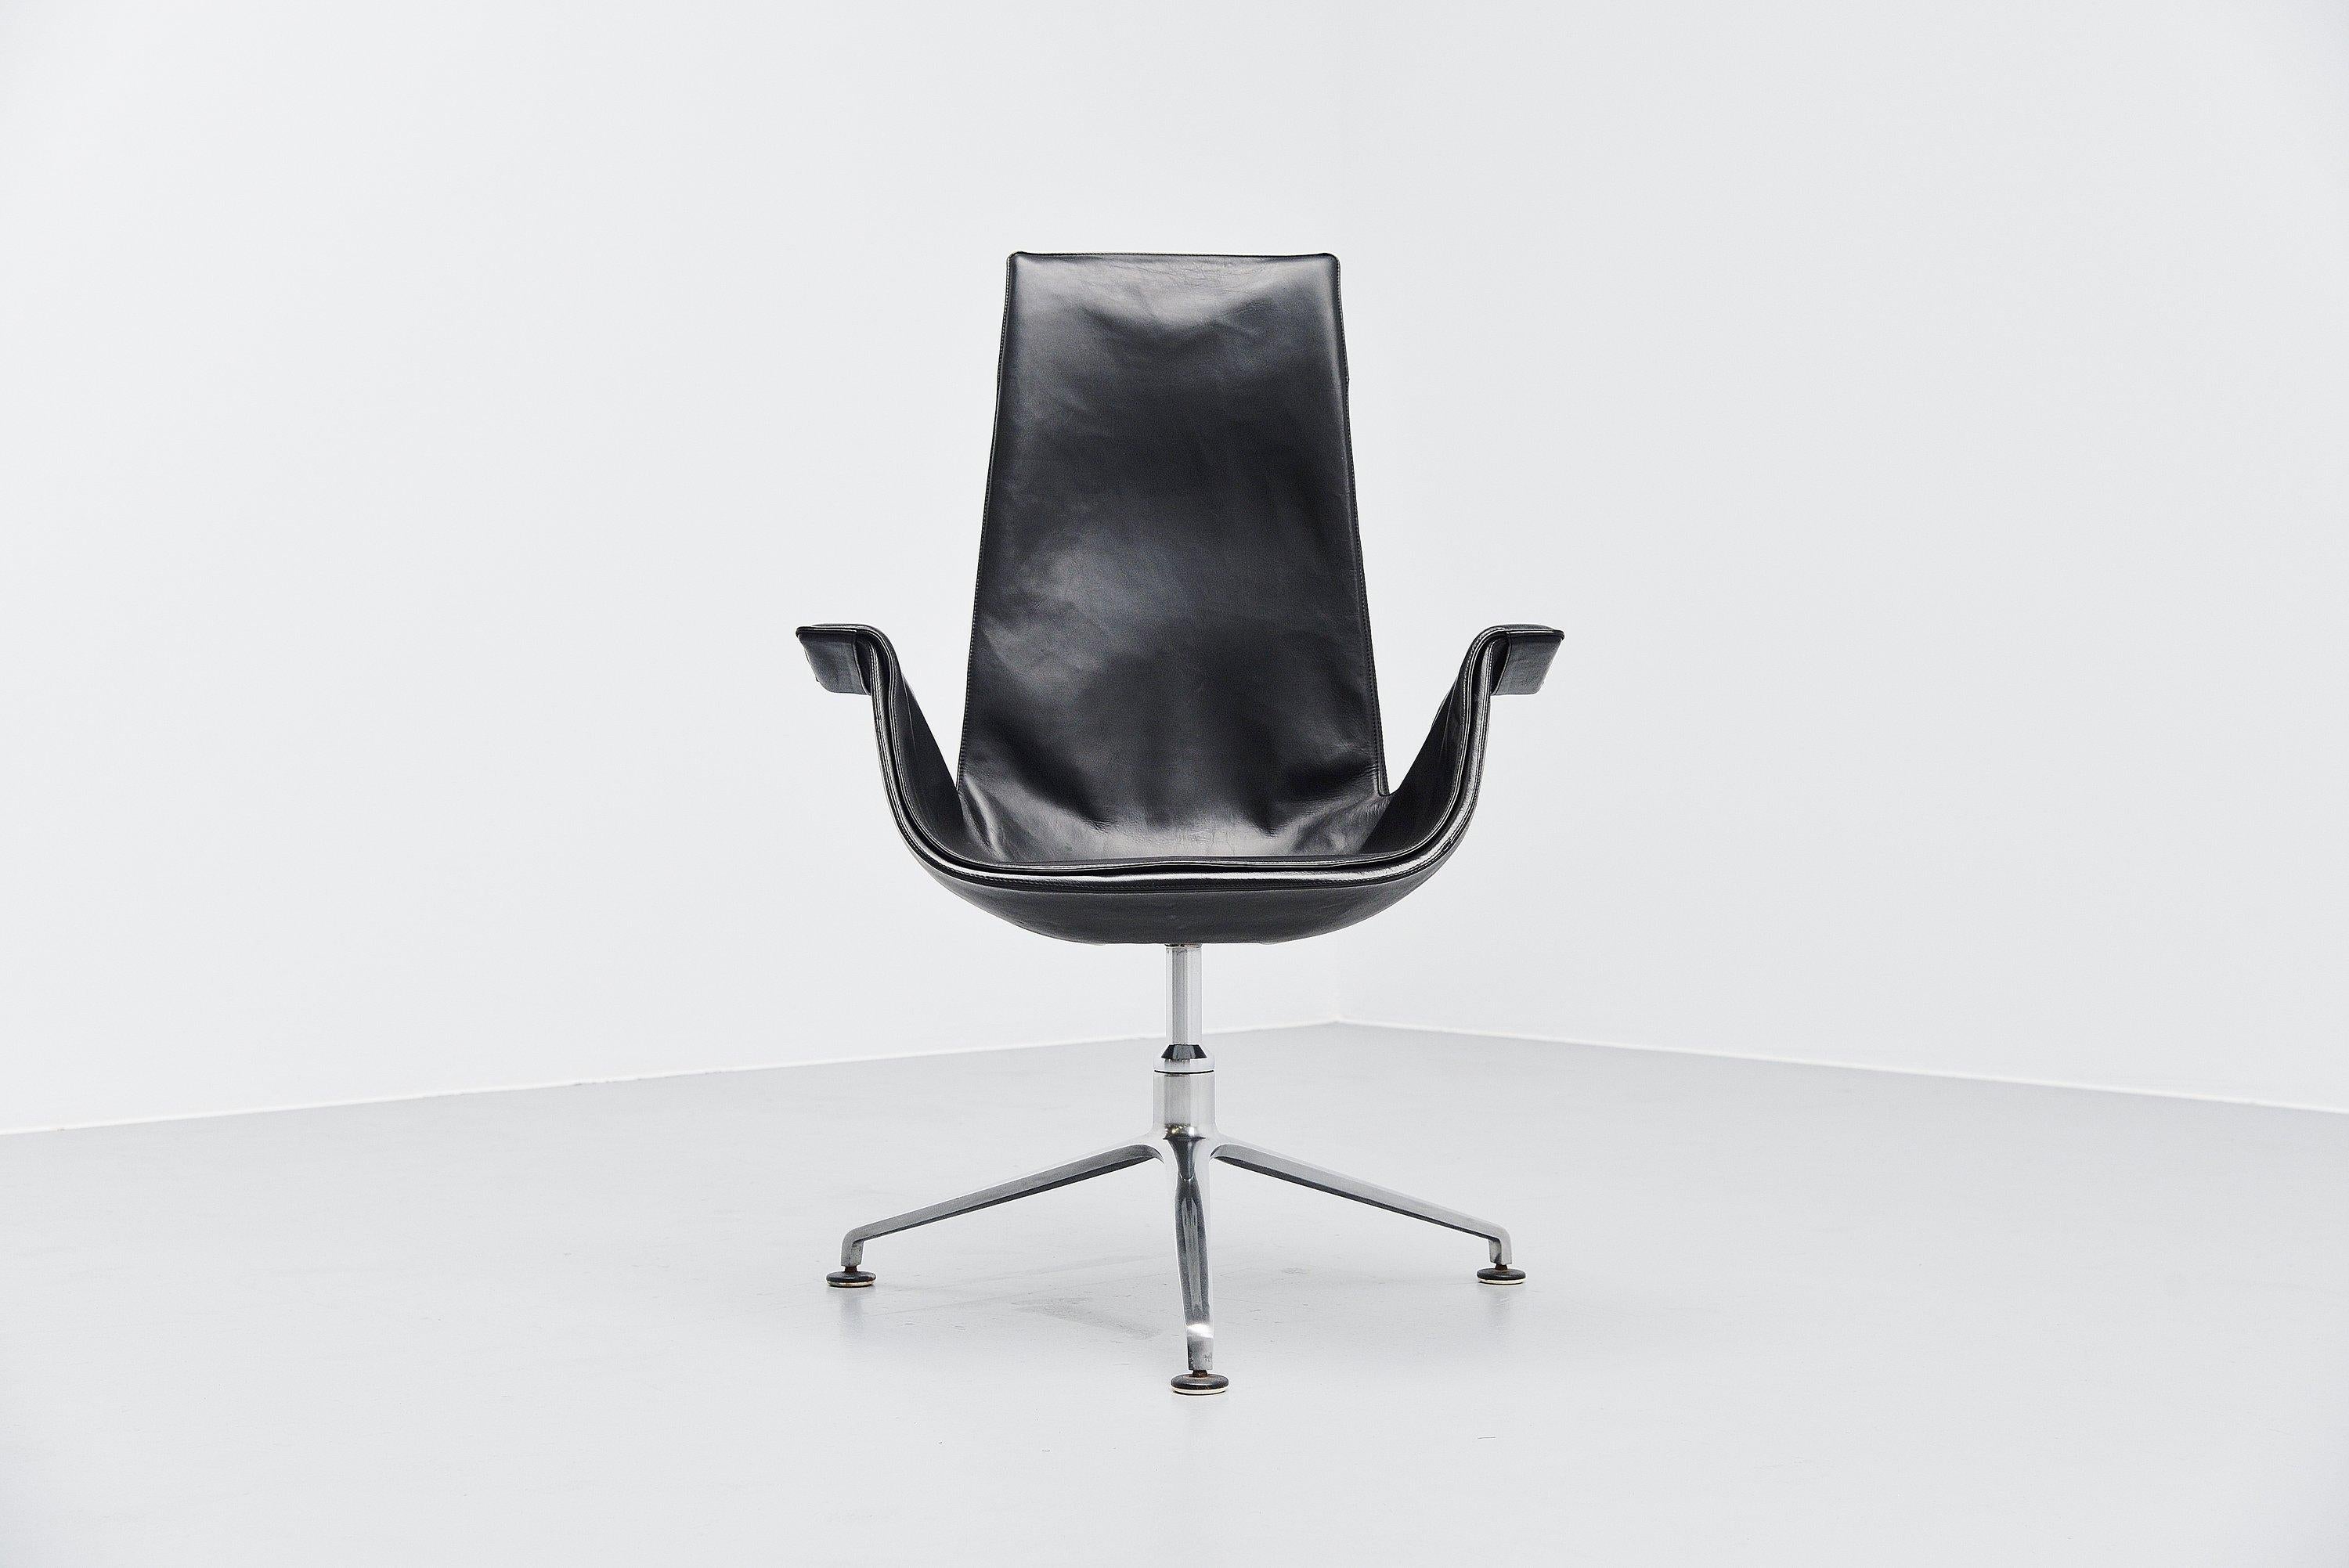 High back executive chair model FK6725 designed by Preben Fabricius and Jorgen Kastholm, manufactured by Kill International, Germany, 1964. This so called bird chair is still in fantastic condition, the black leather shows minimal signs of usage,